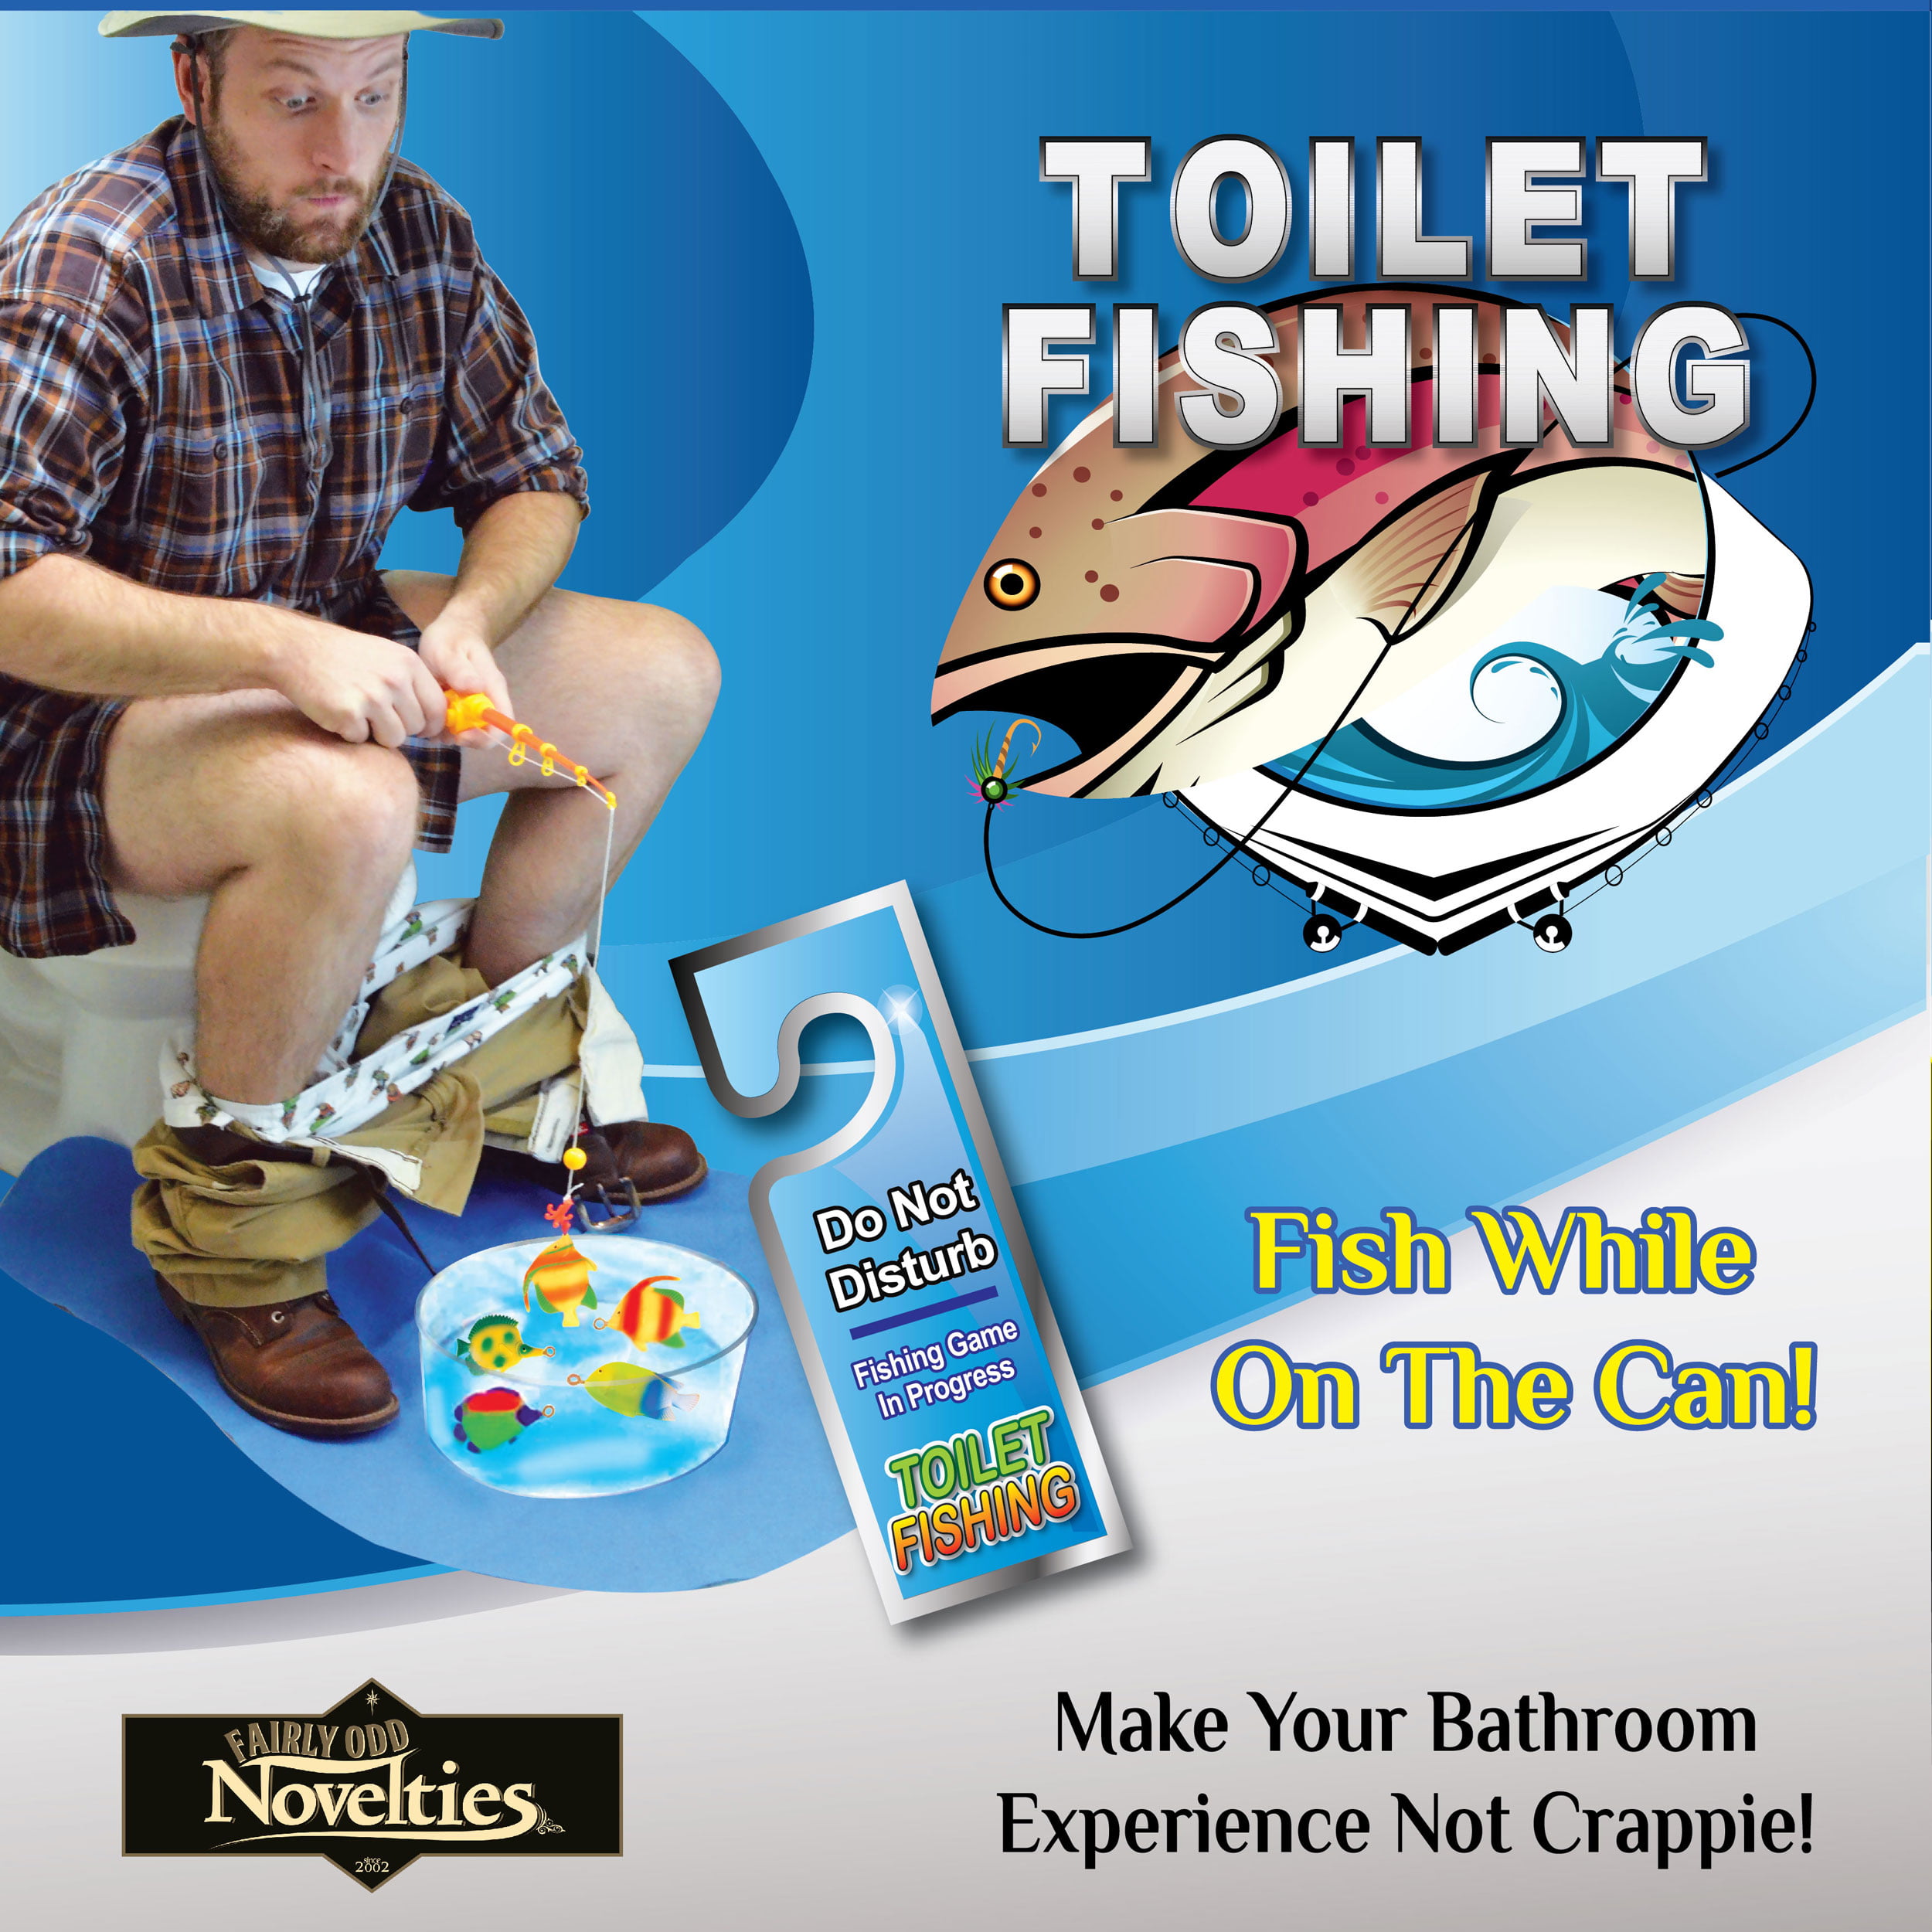 Potty Fisher Toilet Fishing Game Fairly Odd Novelties for sale online 